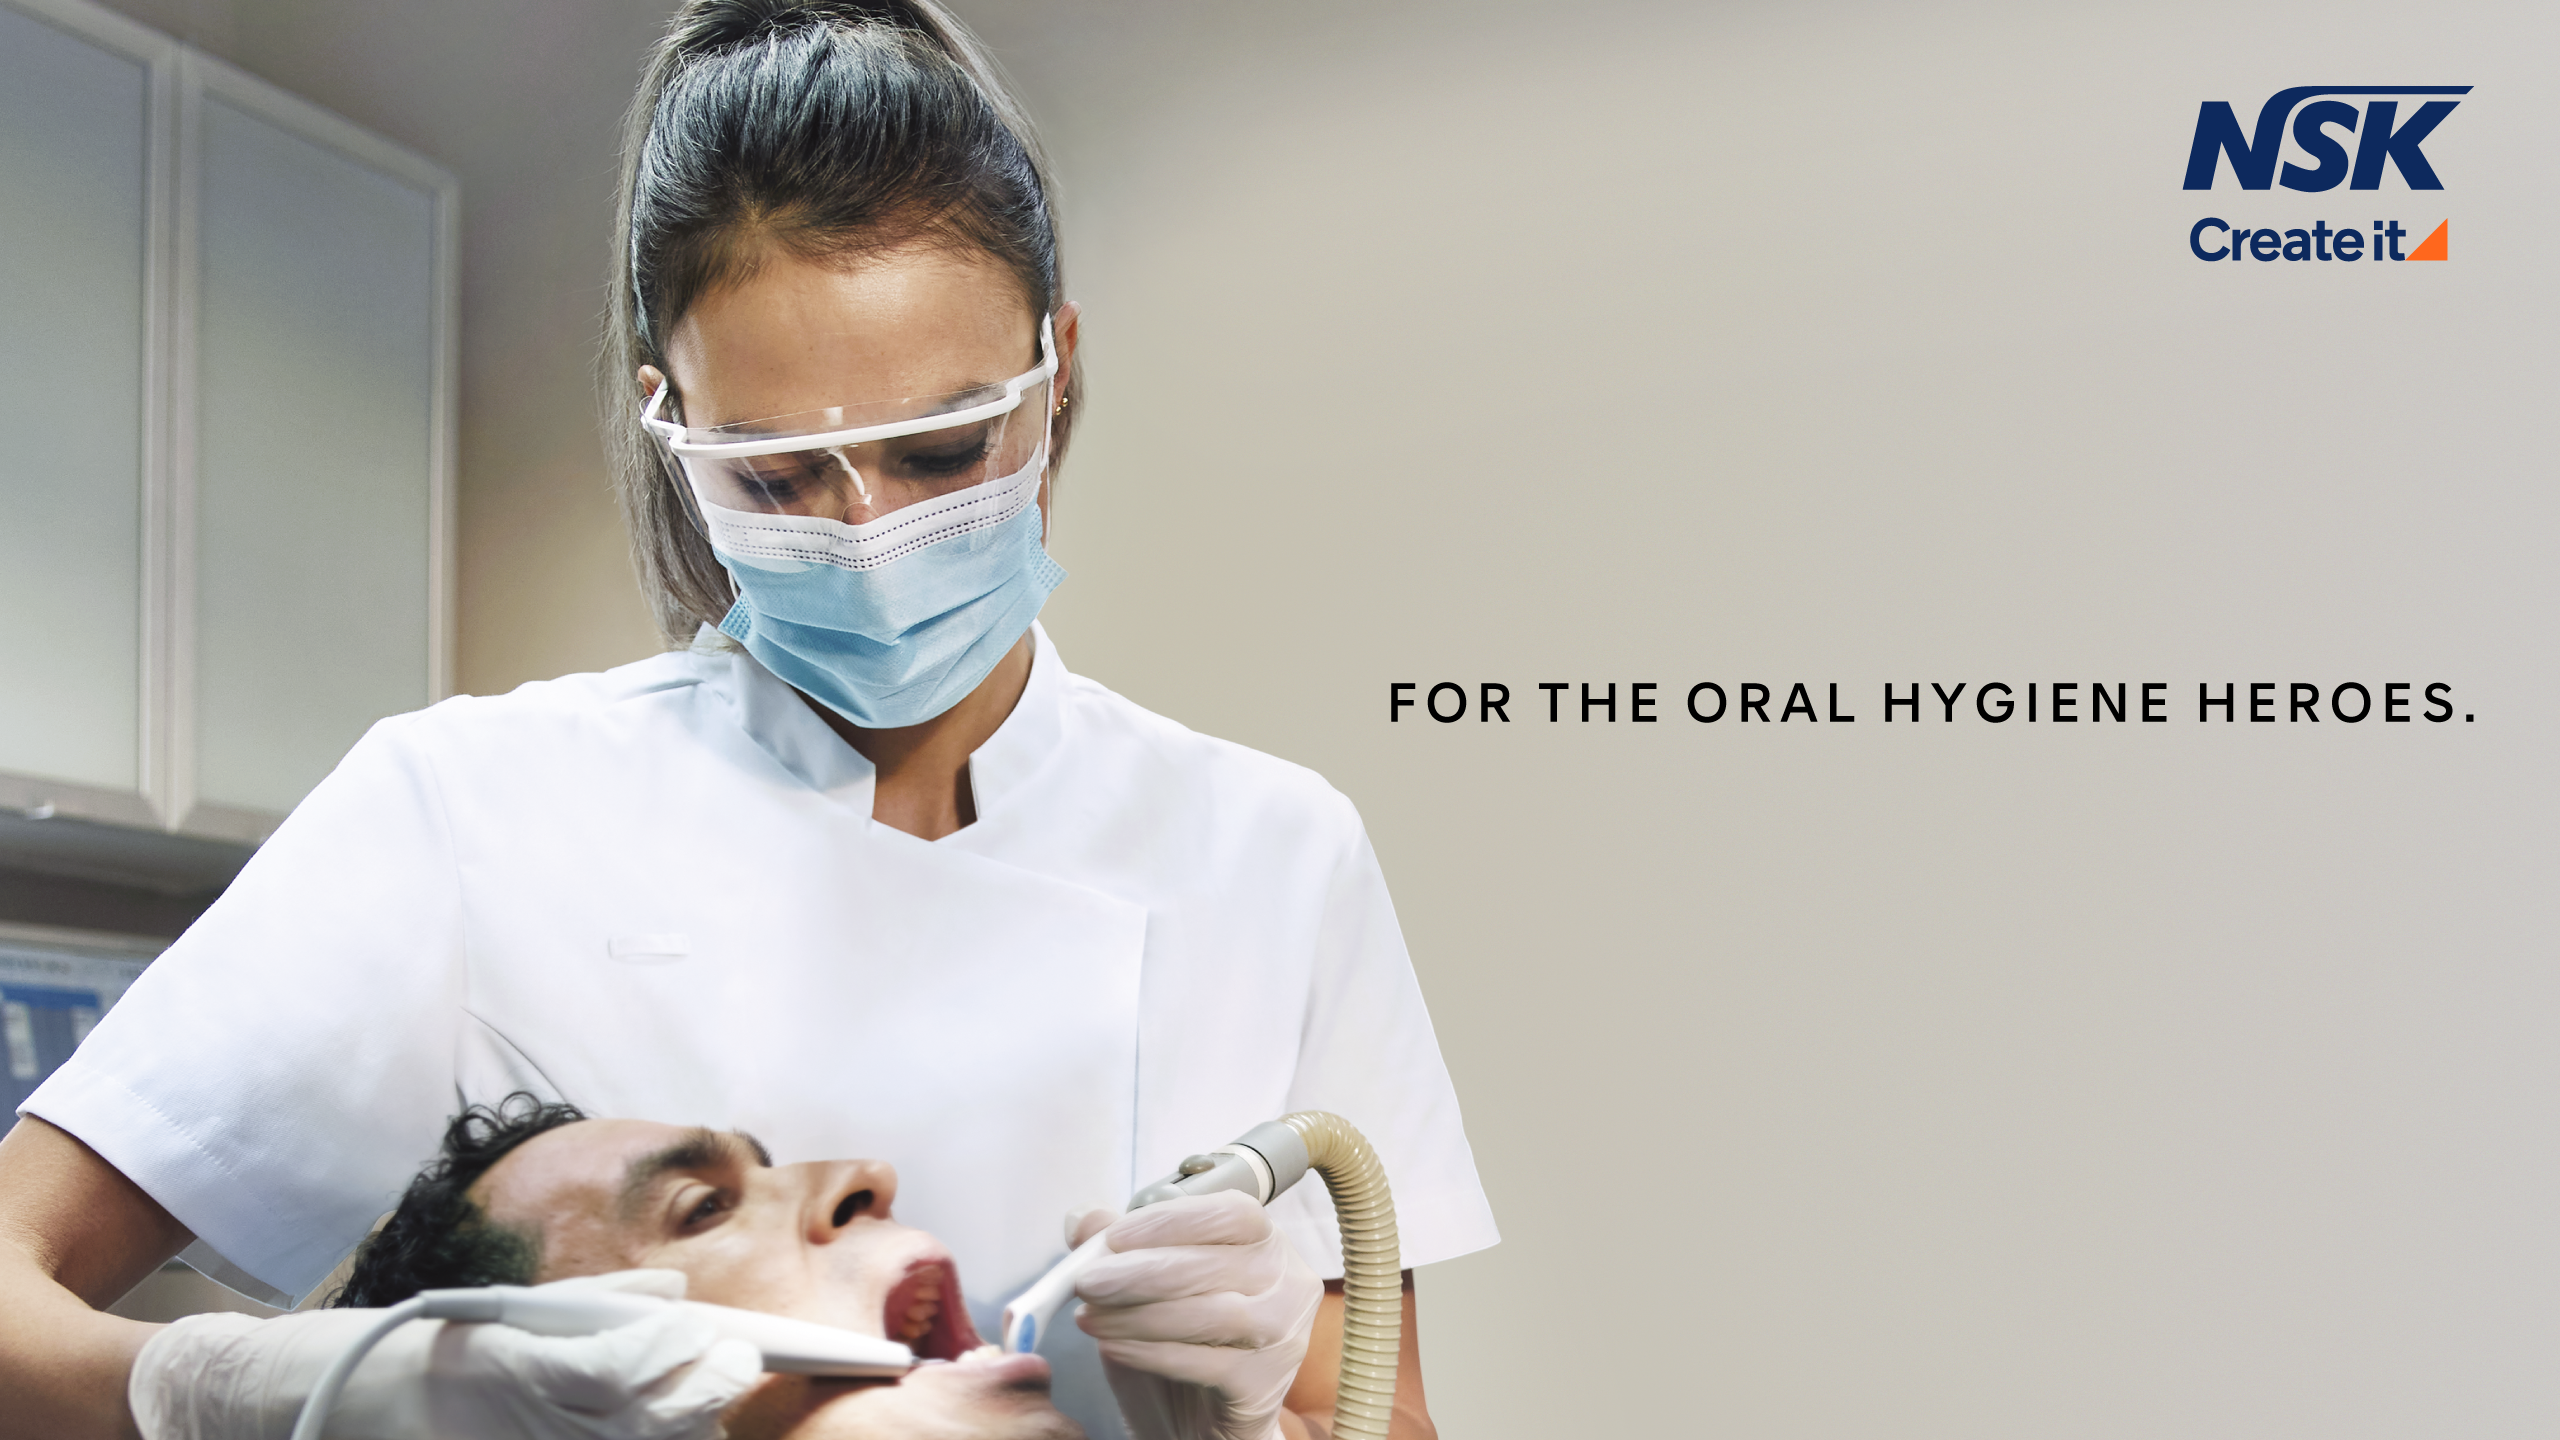 FOR THE ORAL HYGIENE HEROES